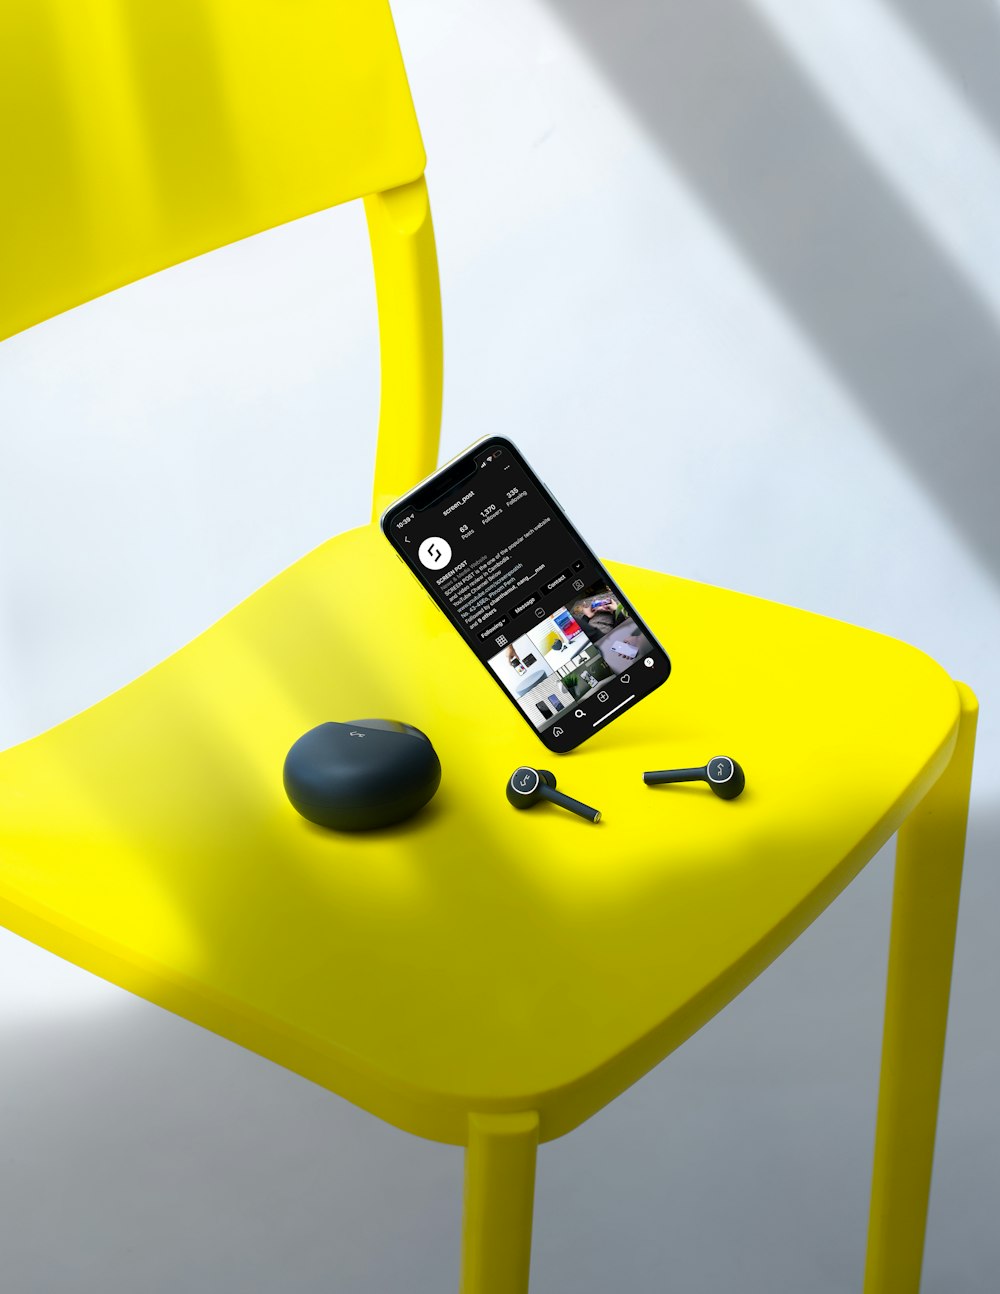 black iphone 4 on yellow chair